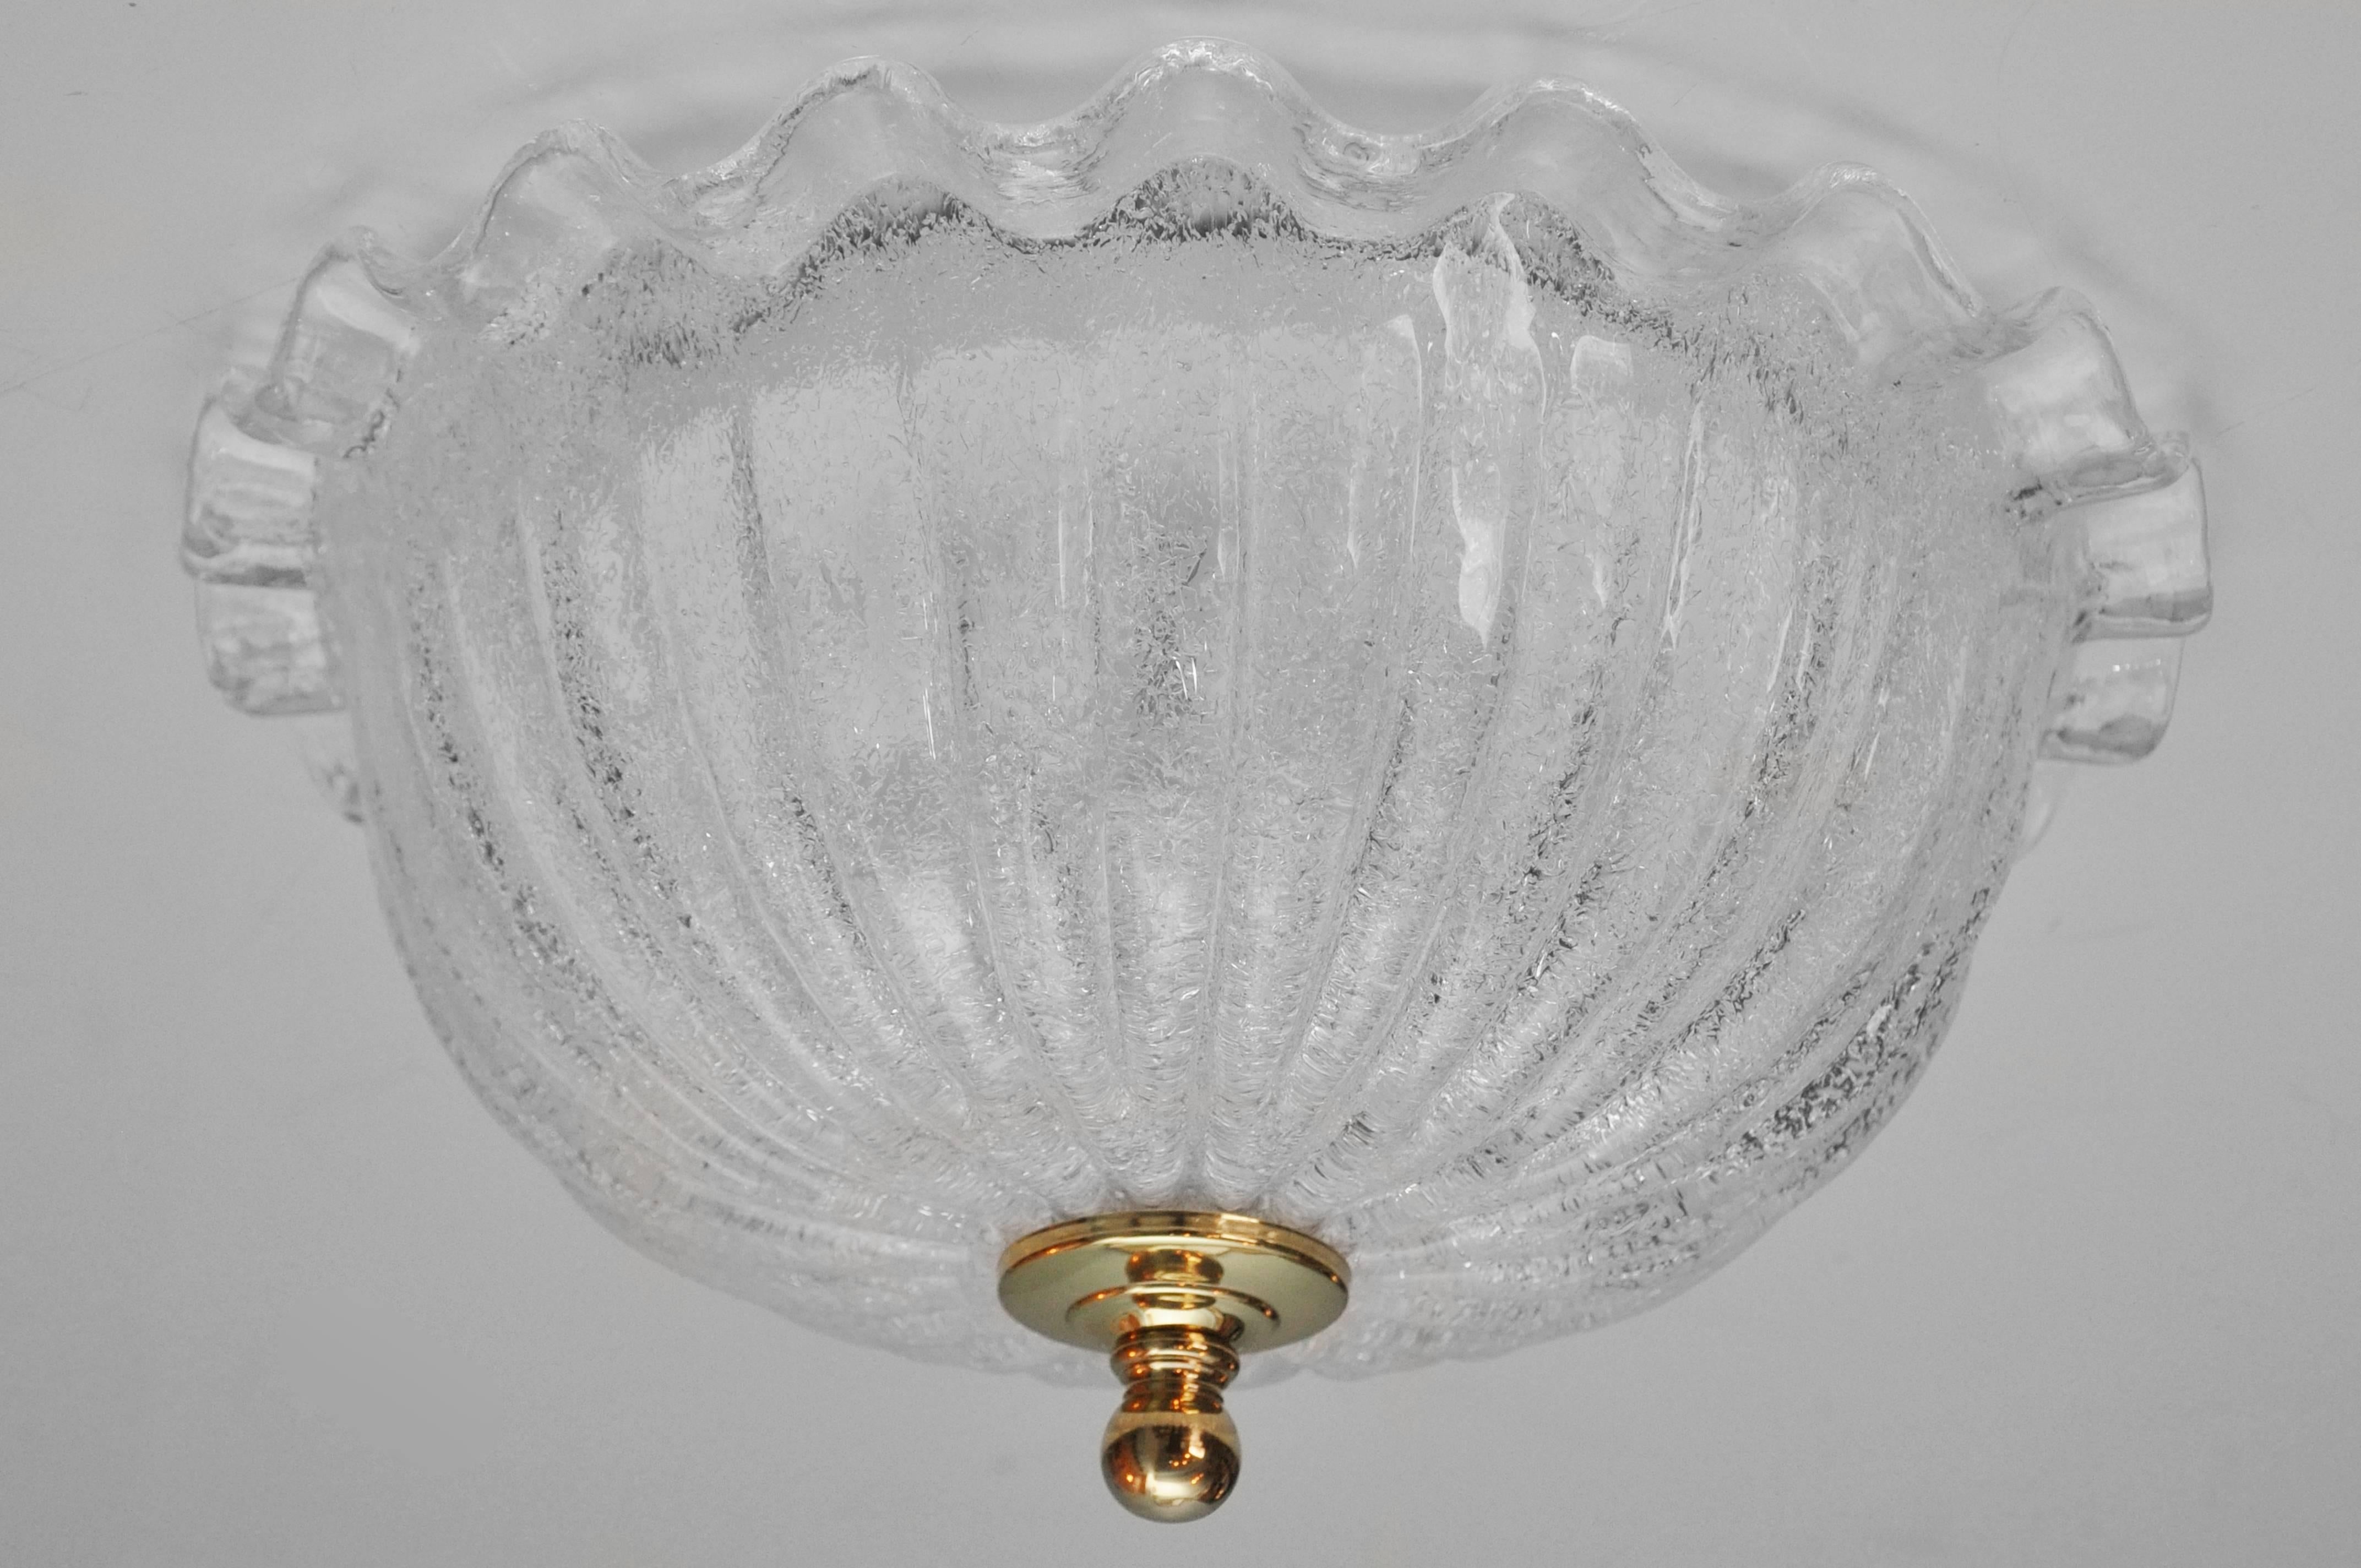 Clear Murano glass ceiling fixture. Brass finial. Underside has two standard size bulb sockets for up to 60 watts for each bulb. Attached to ceiling light fixture box. Ruffled glass edge. I have two available. Price listed is for one.